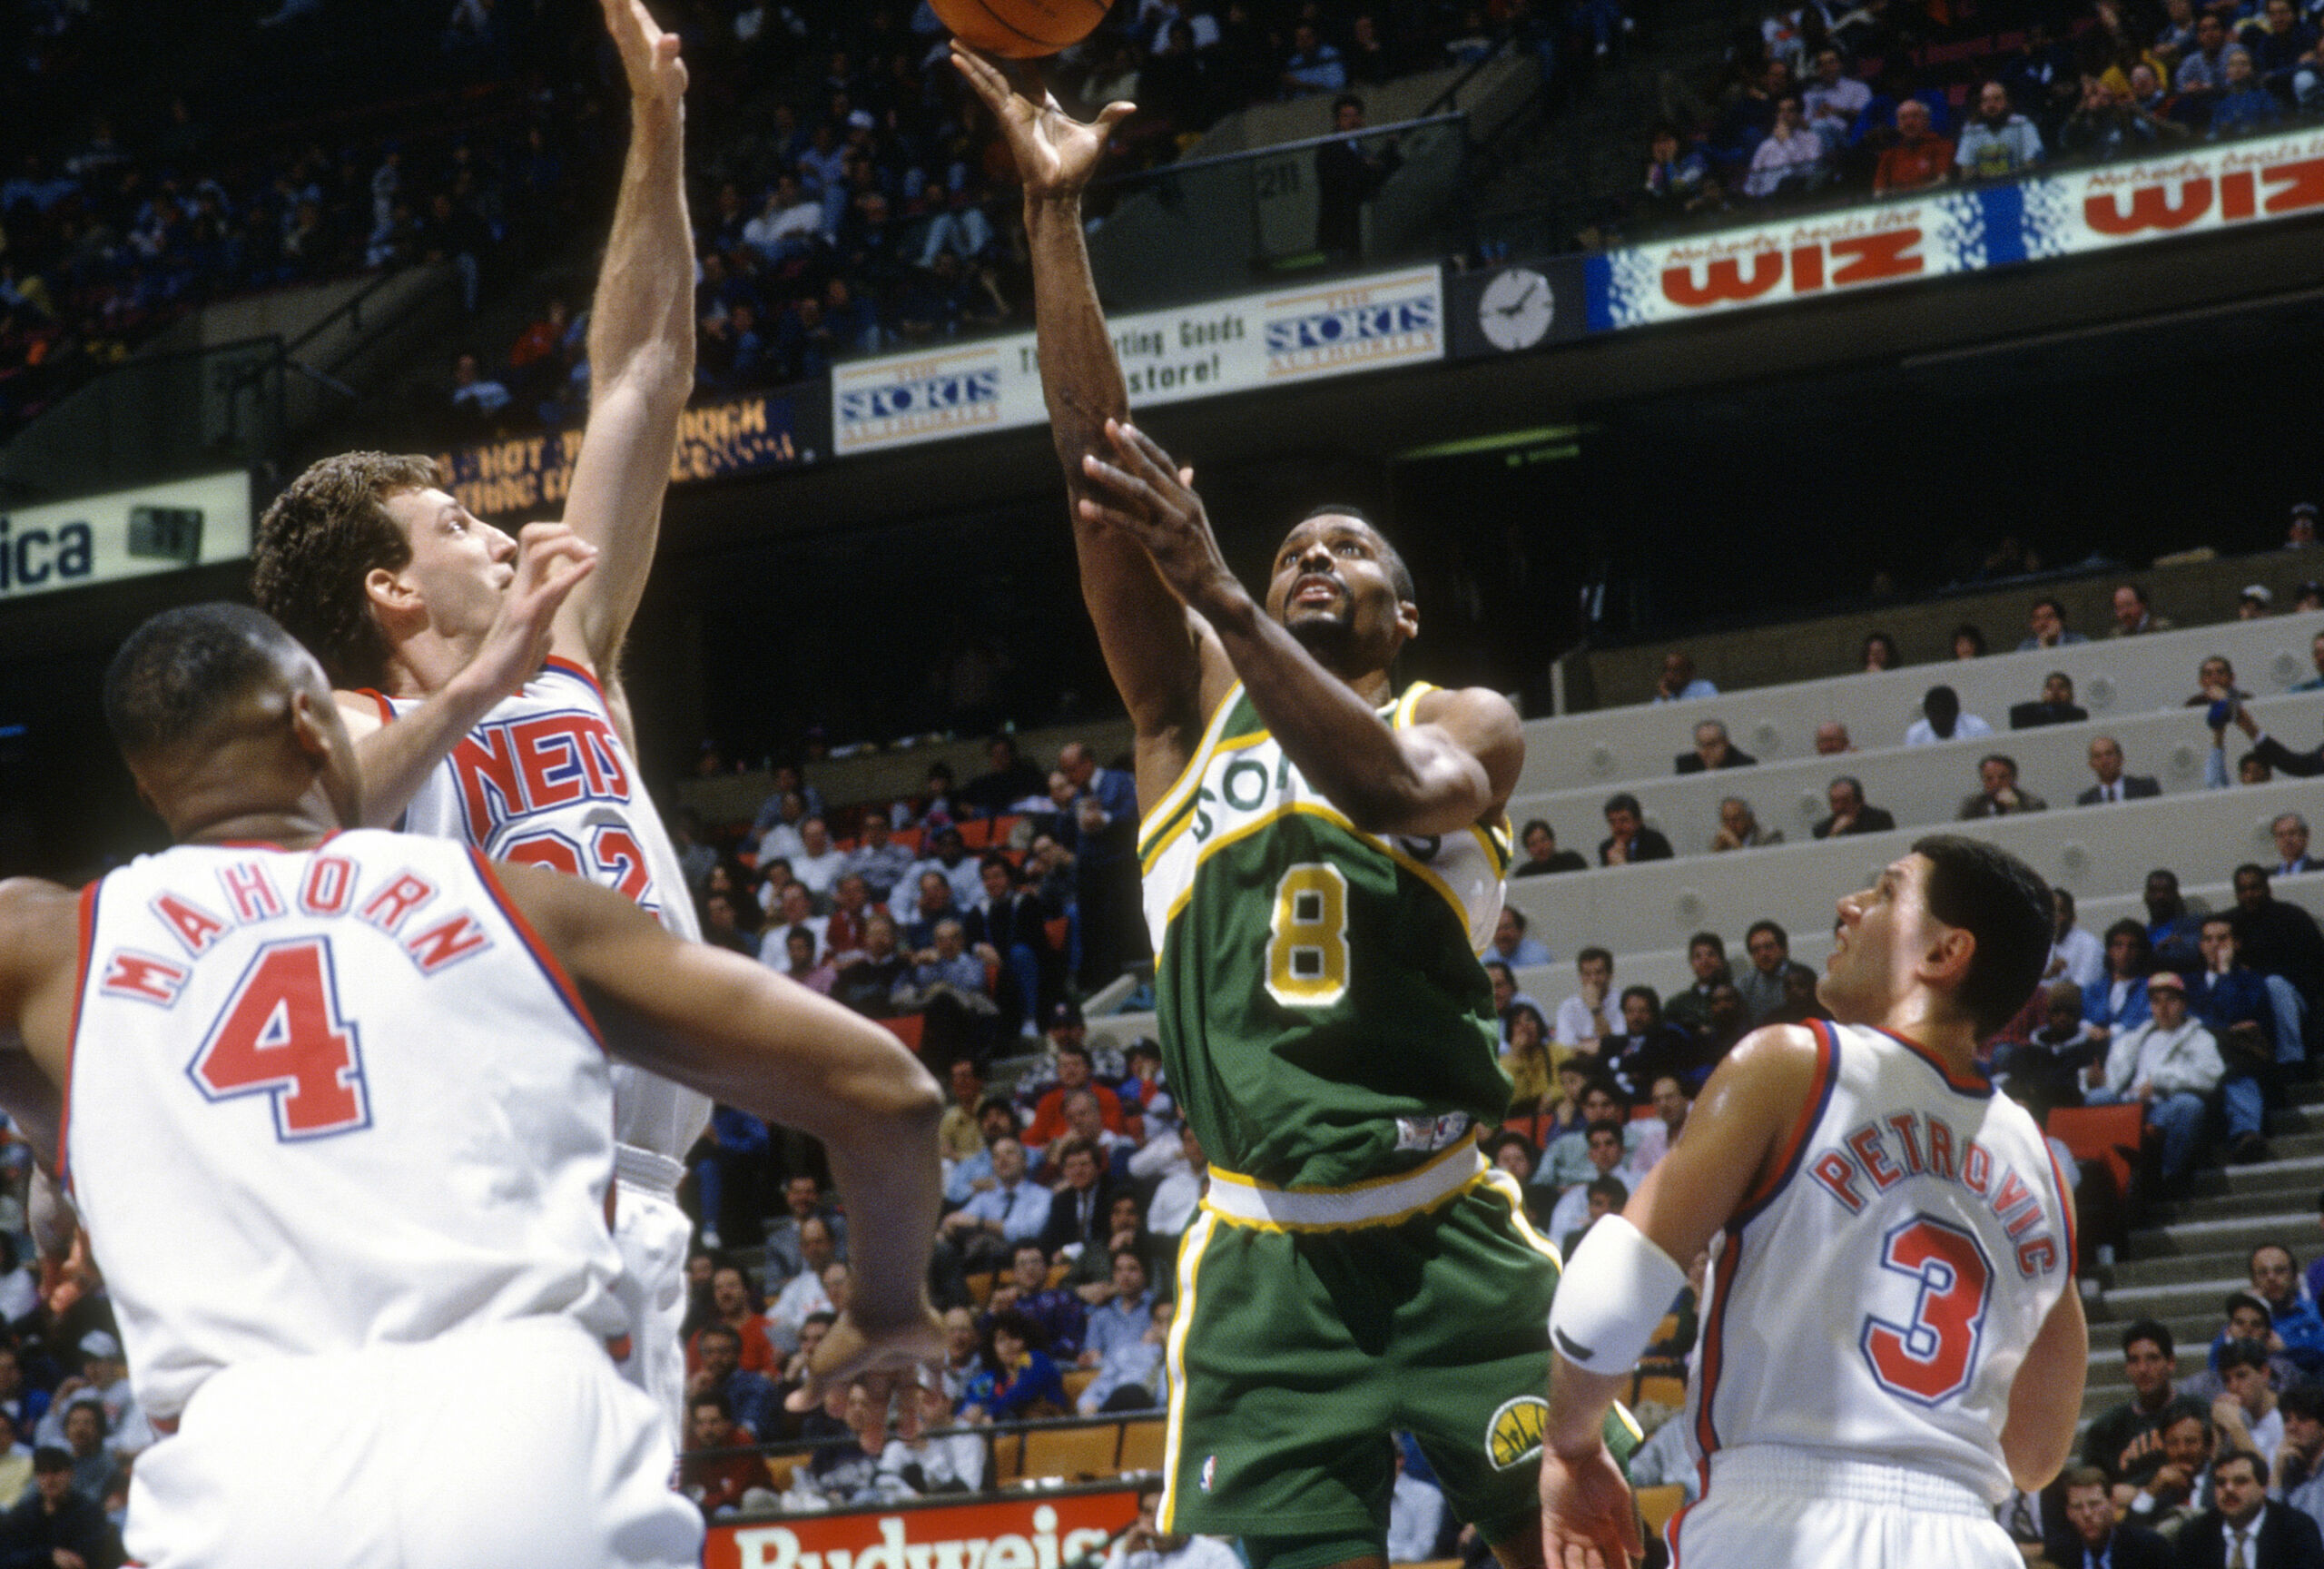 Who was the final draft pick of the Seattle SuperSonics?